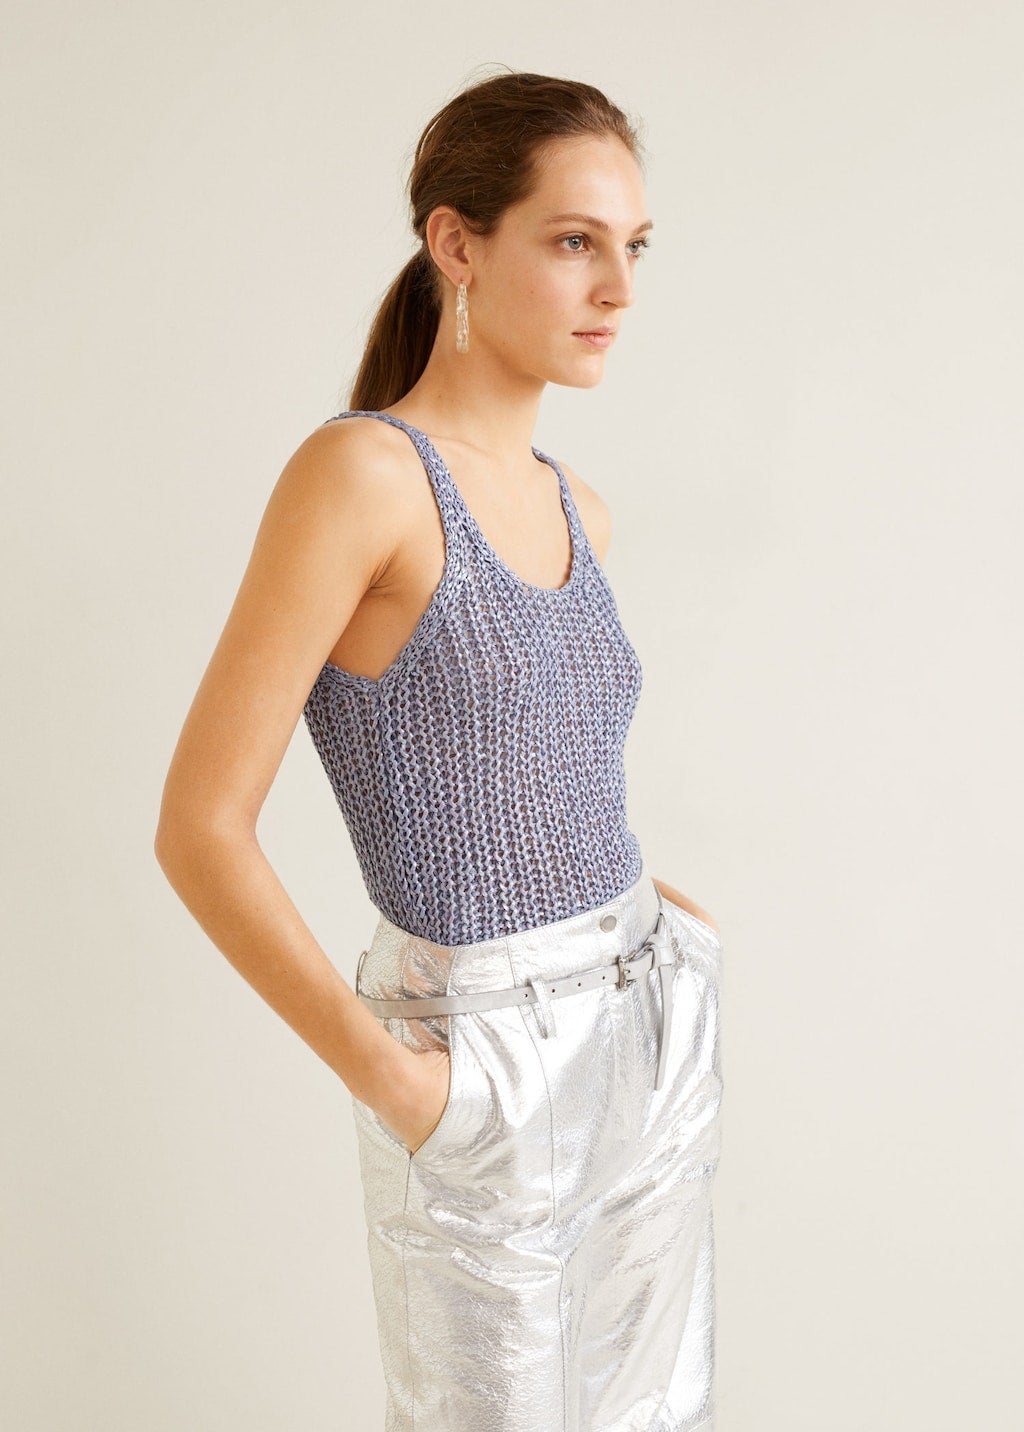 The Knit Tank is the Top of the Summer, Here's Where to Snag One